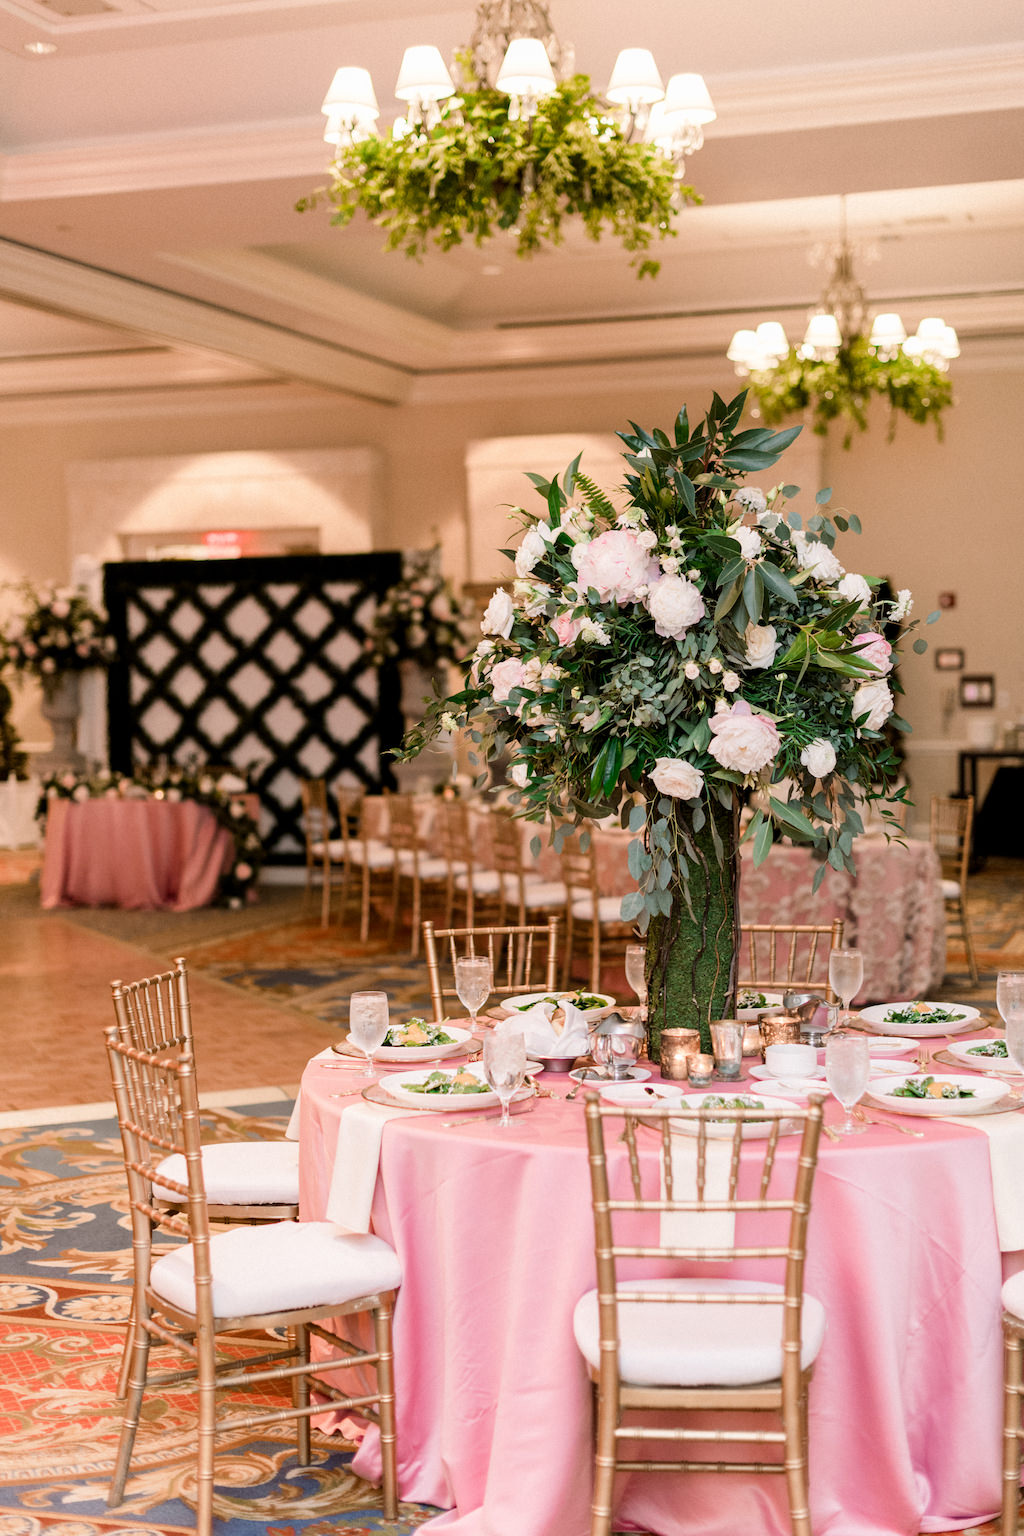 Florida Ballroom Wedding Reception Decor, Round Table with Pink Tablecloth, Gold Chiavari Chairs, Tall Greenery, Ivory and Blush Pink Floral Centerpiece | Wedding Venue Tampa Bay Marriott Waterside | Wedding Rental Company A Chair Affair | Over the Top Rental Linens